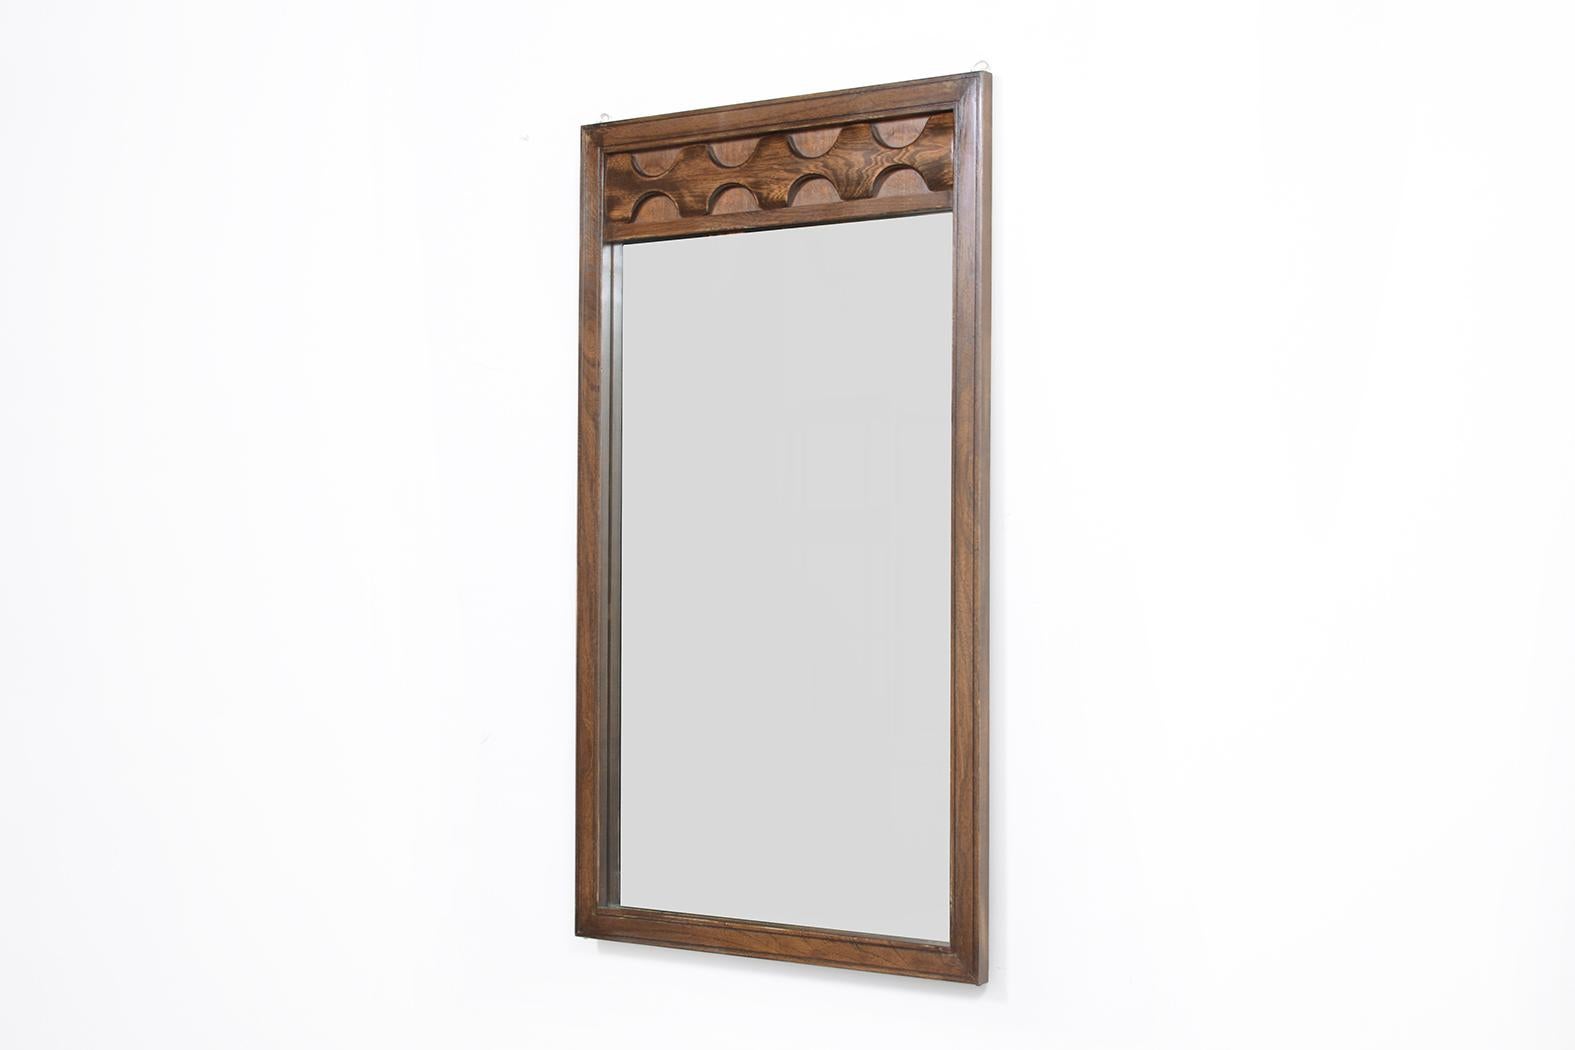 Carved 1960s Brutalist Mid-Century Modern Wall Mirror: A Timeless Decorative Piece For Sale